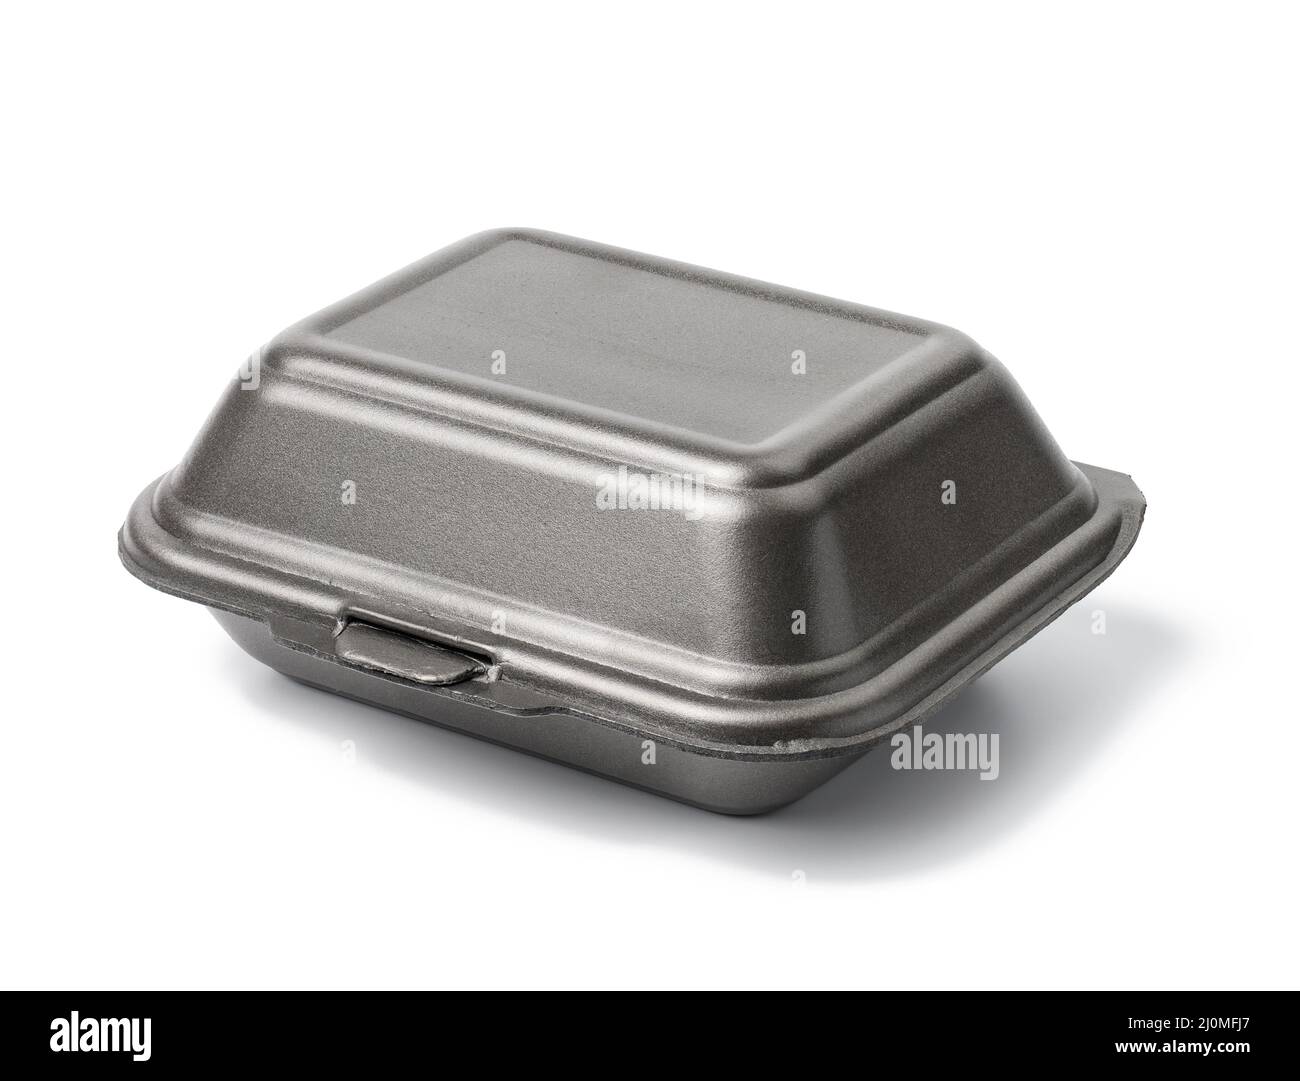 Disposable food container. Gray box of polystyrene on a white background Stock Photo